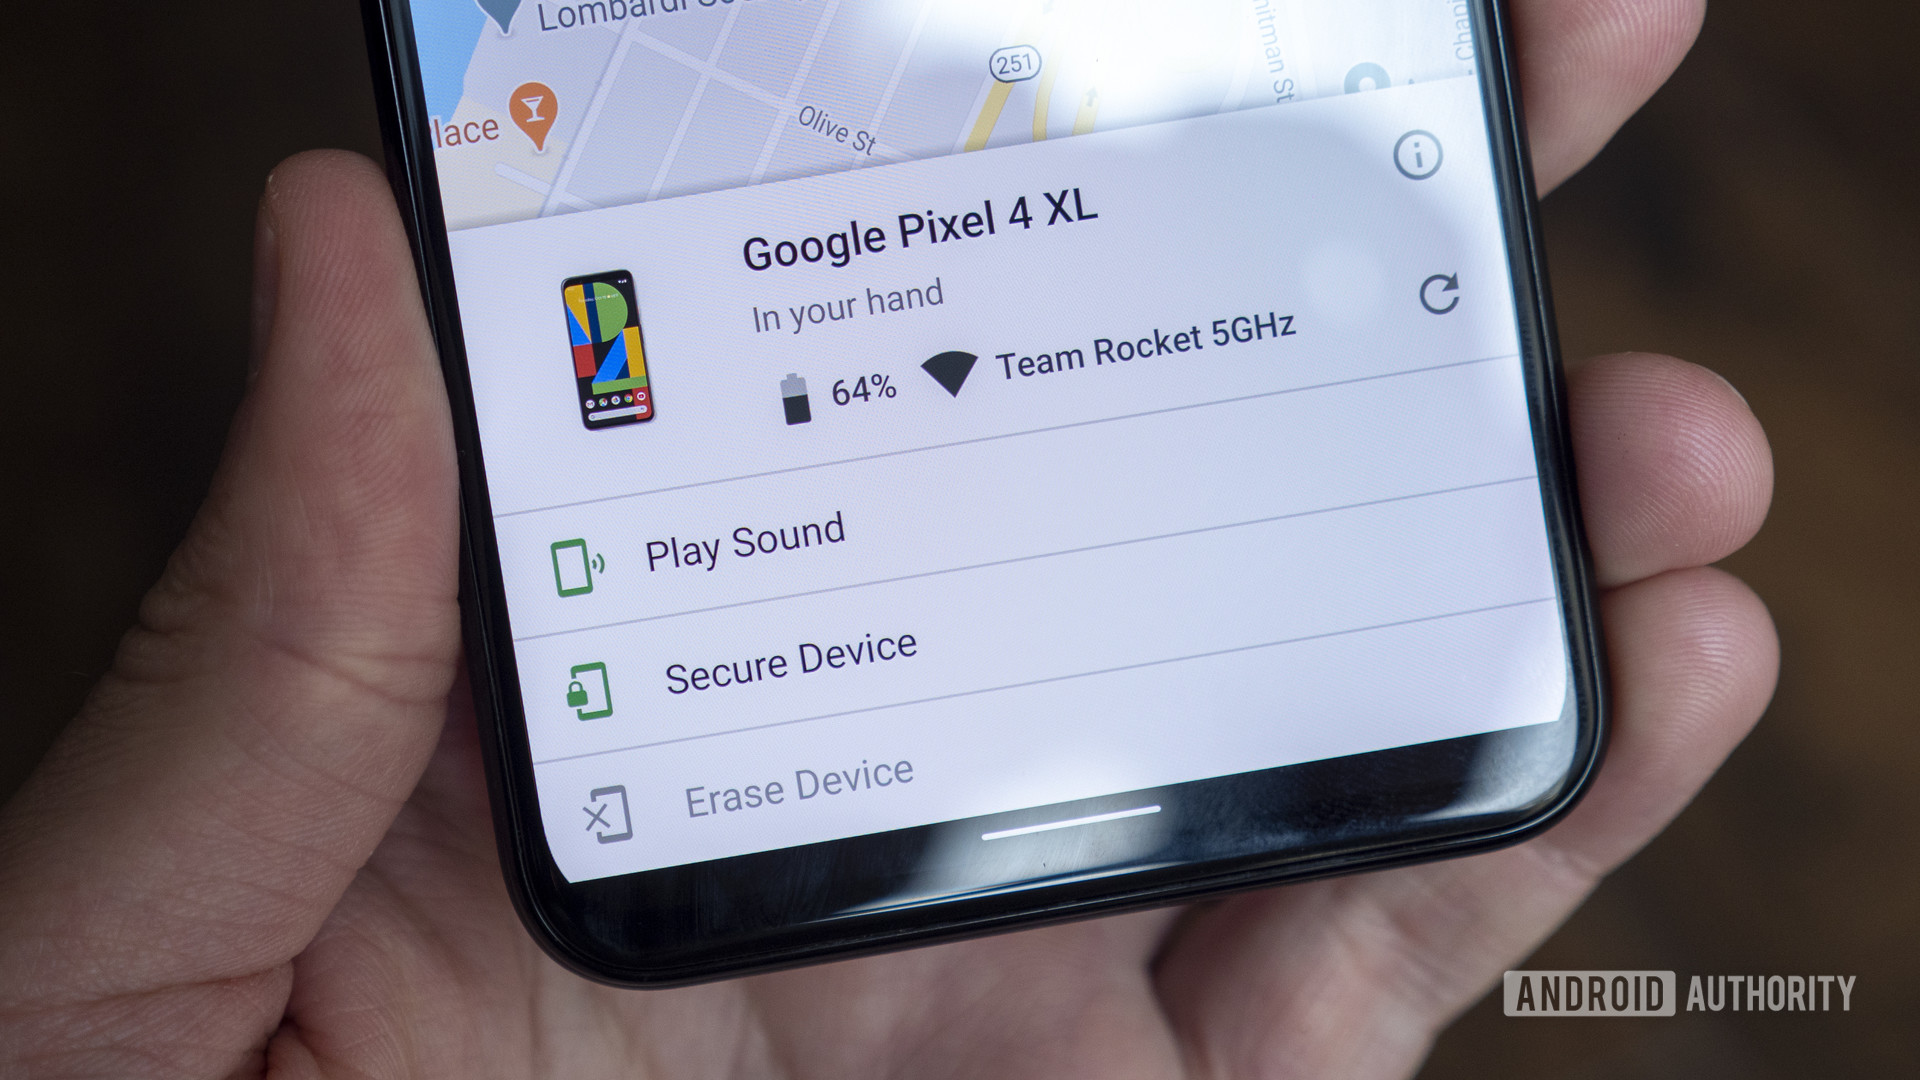 how to find a lost phone find my device google pixel 4 xl play sound erase device